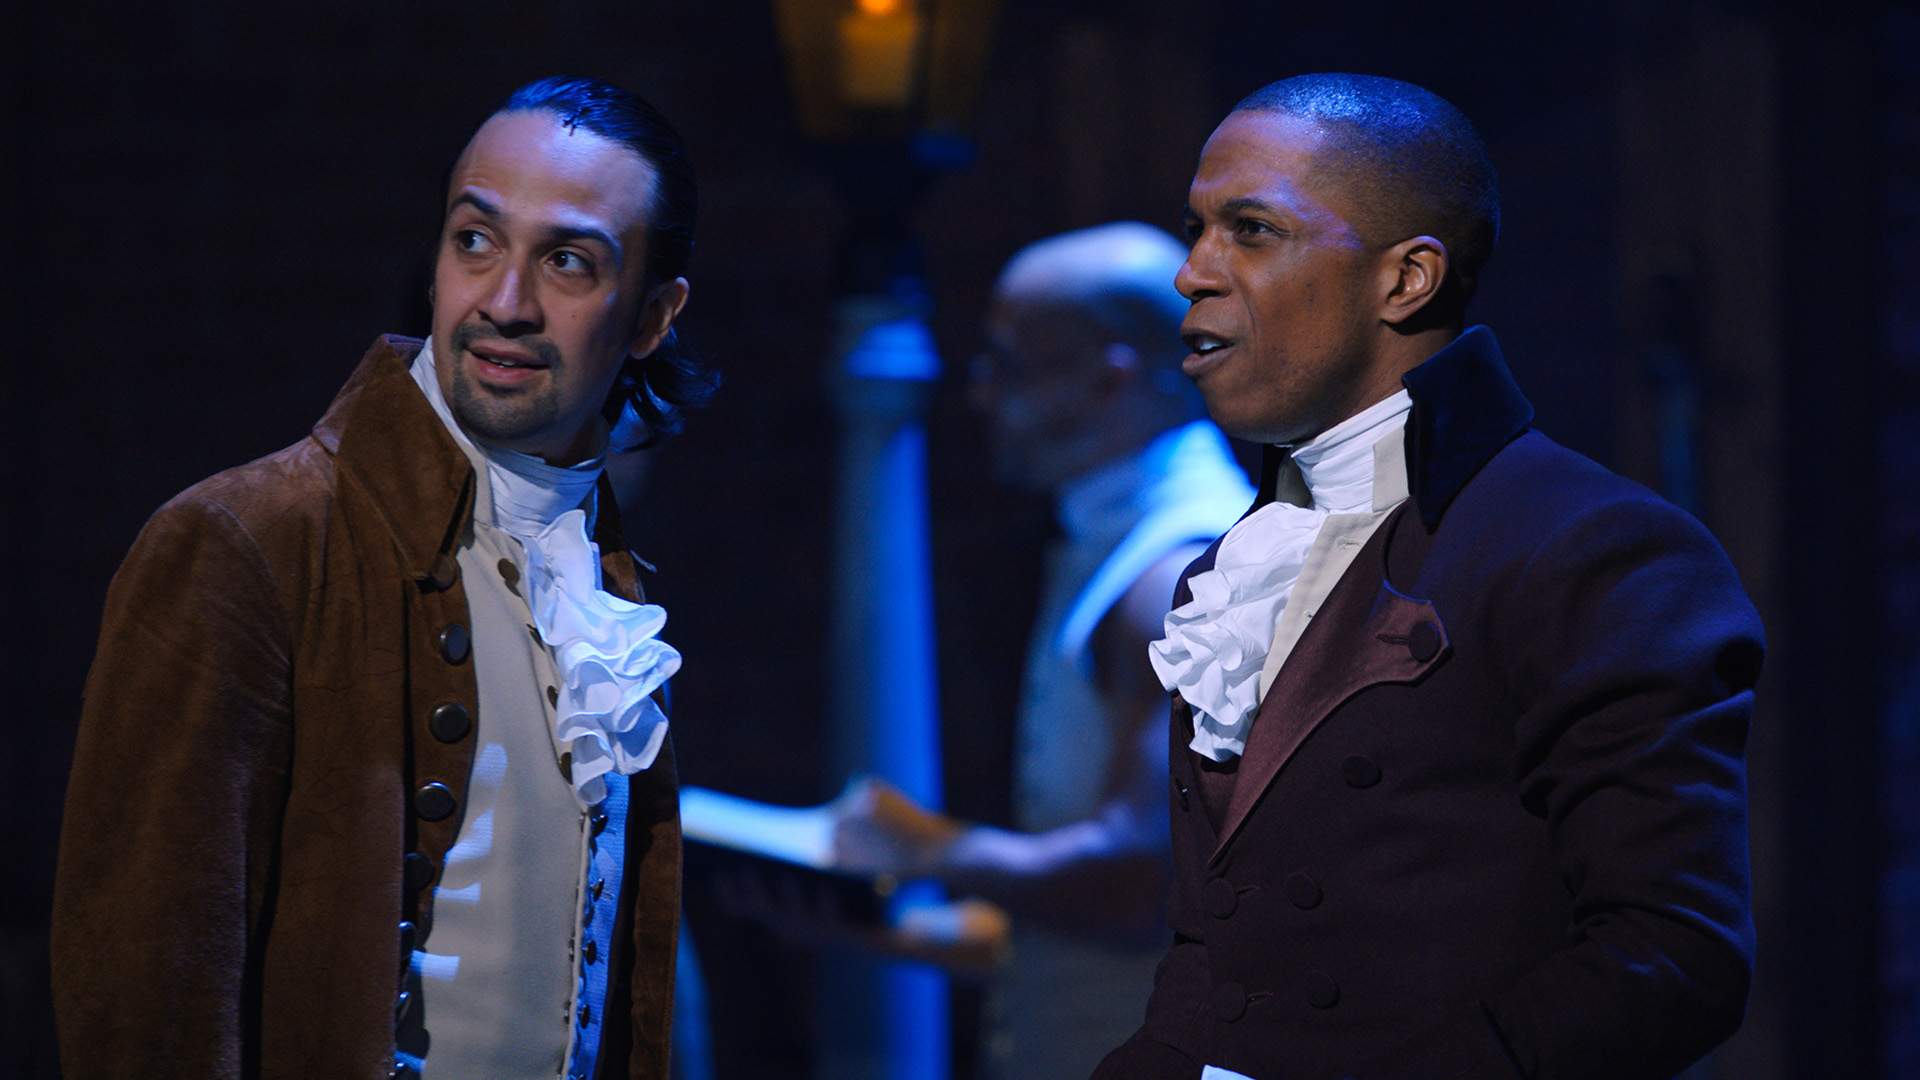 Disney+ Has Added a Sing-Along Version of 'Hamilton' So You Can Make Your House the Room Where It Happens